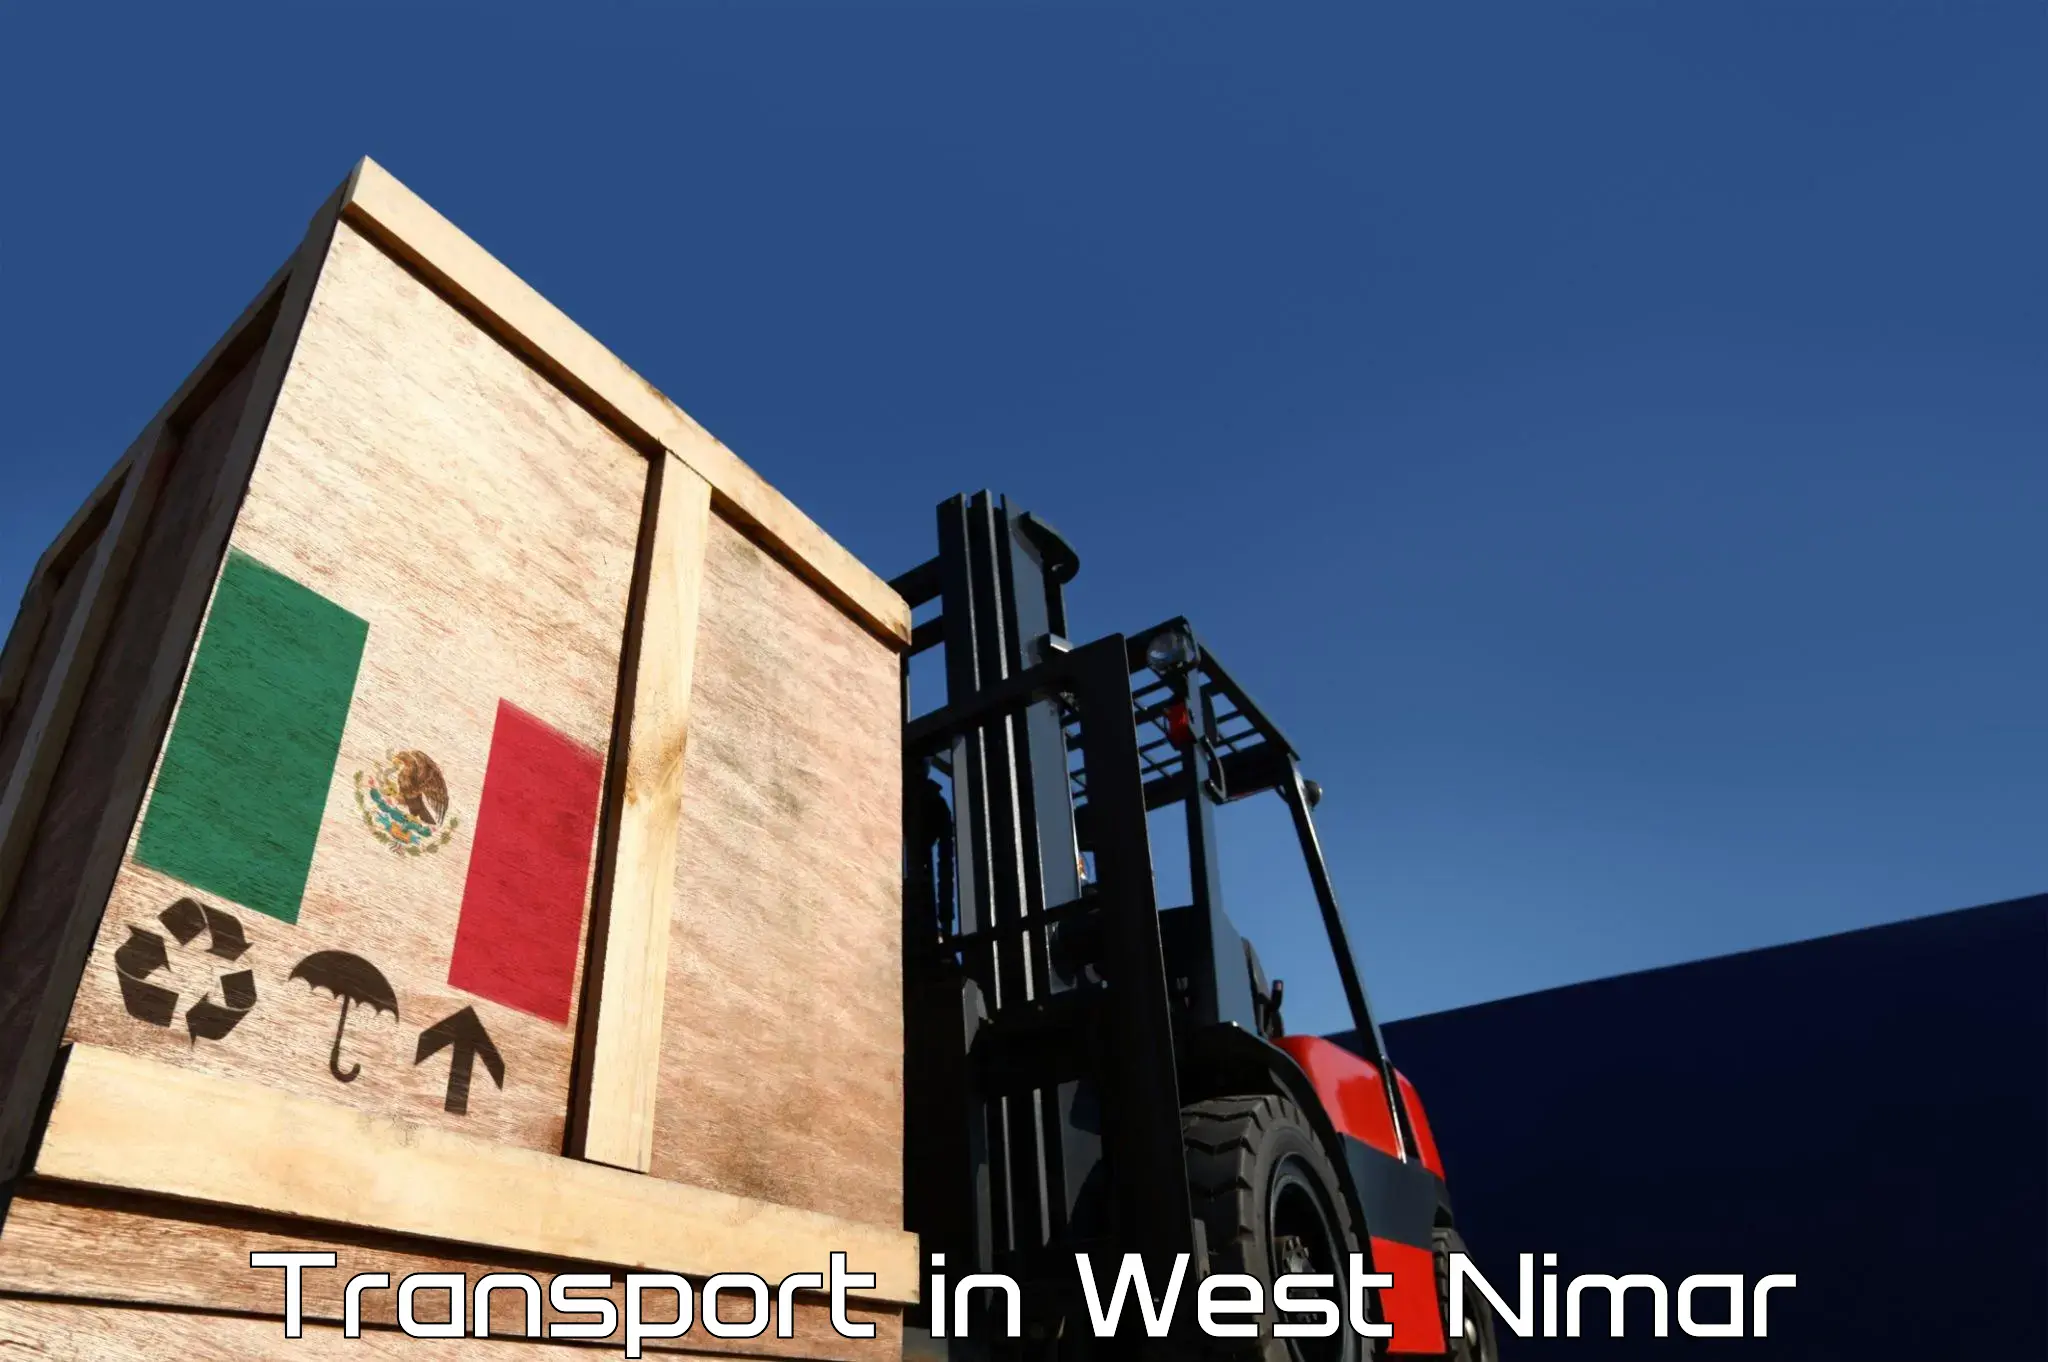 Daily transport service in West Nimar